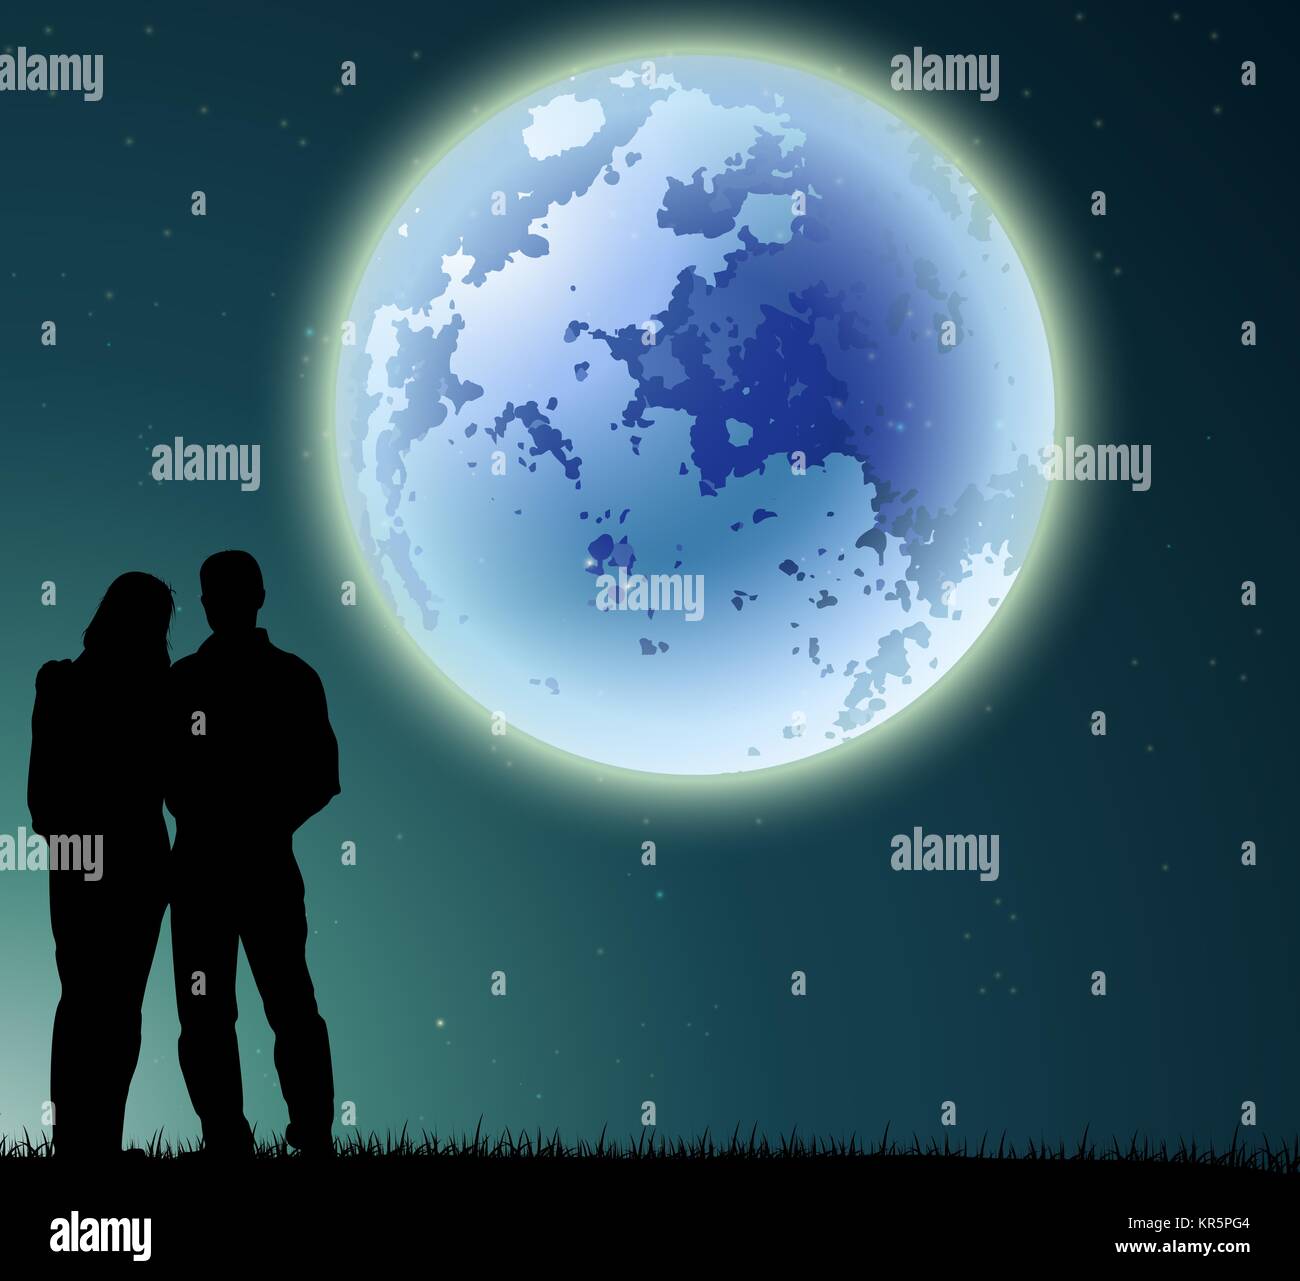 man and woman silhouette on night background Stock Photo